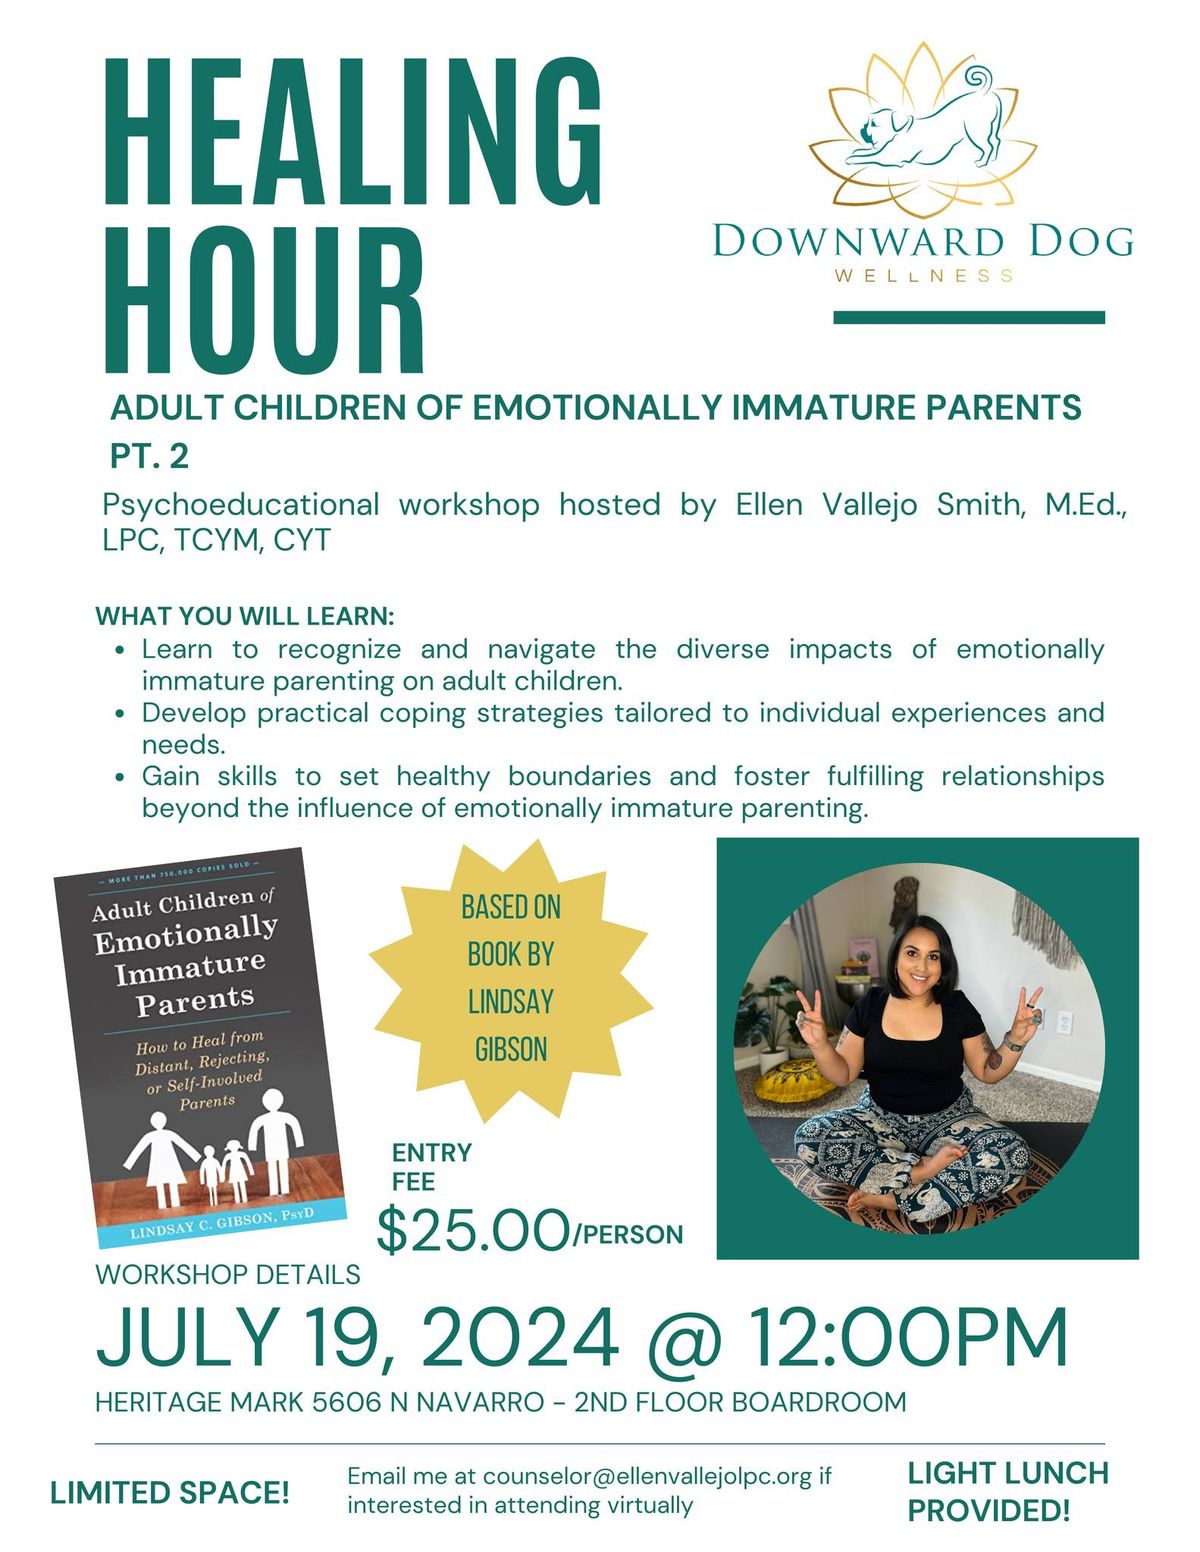 Healing Hour: Adult Children of Emotionally Immature Parents Pt. 2